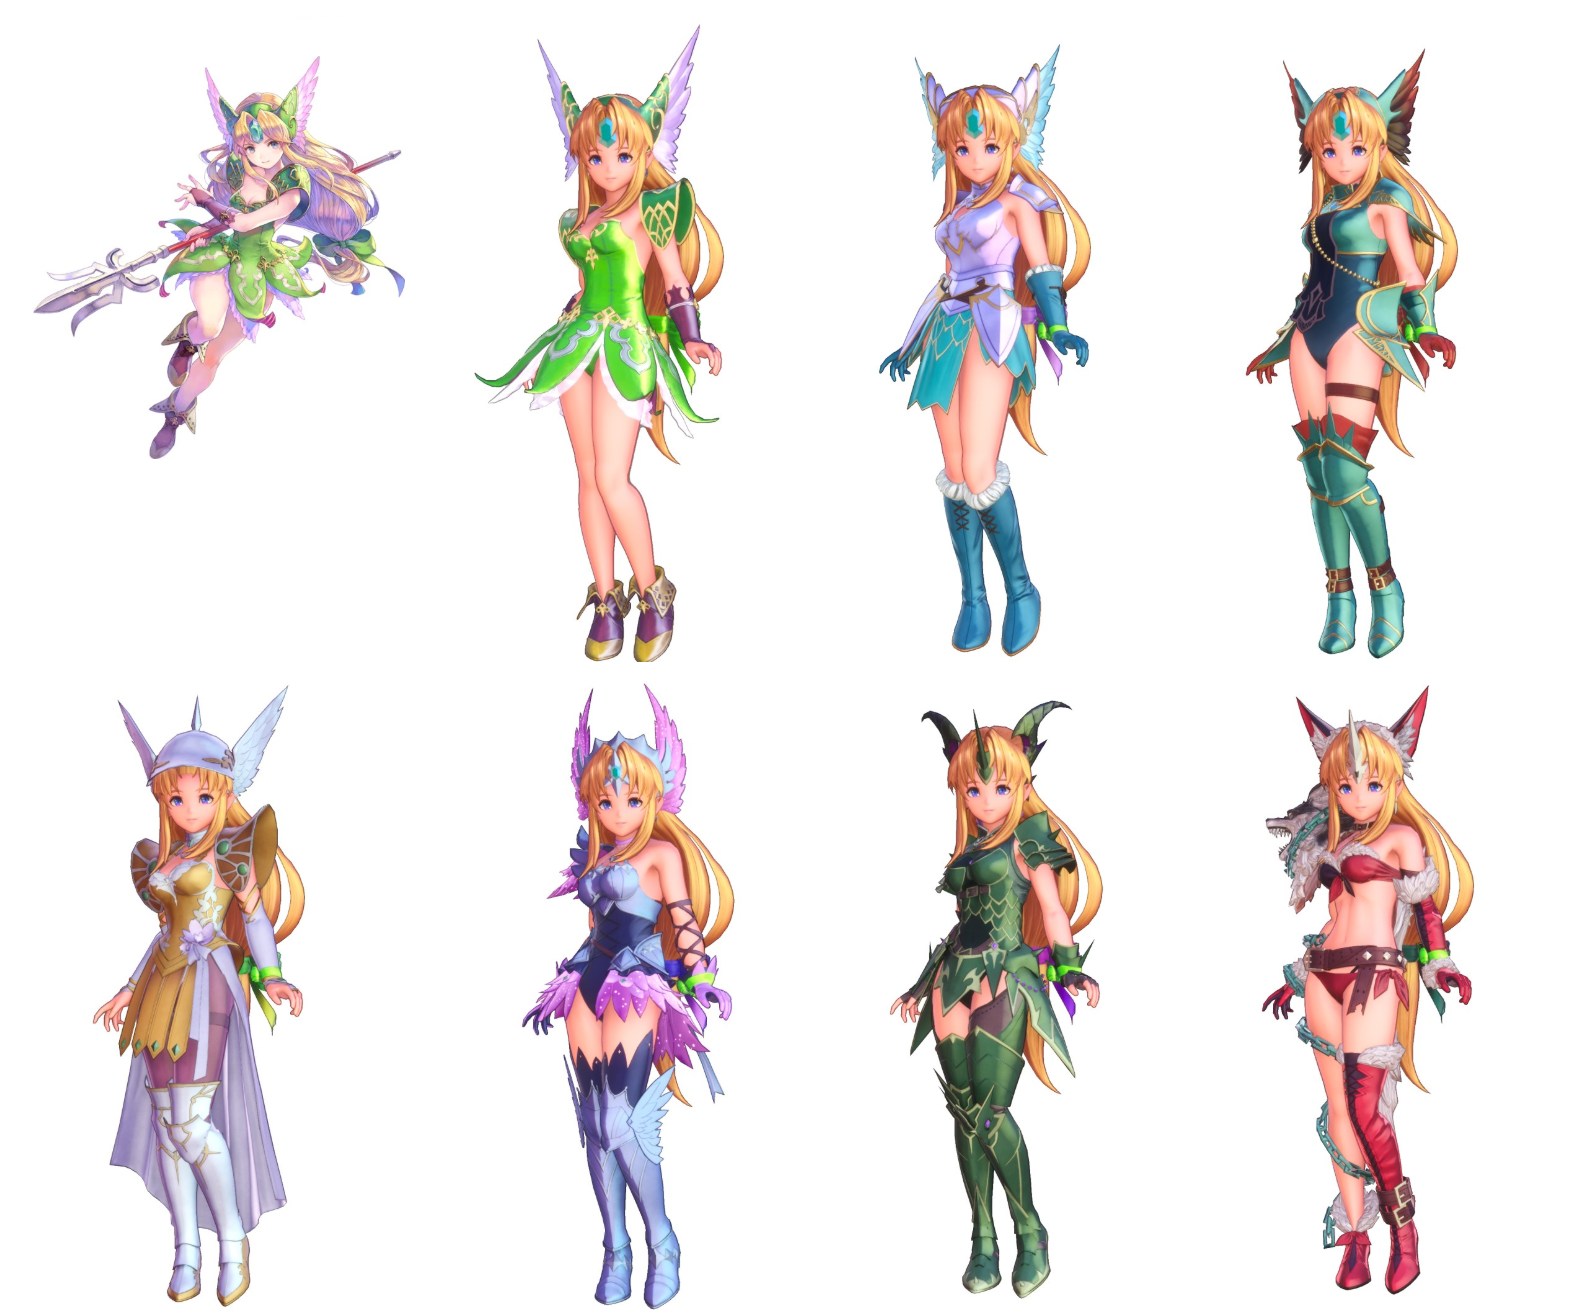 Reisz Trials of Mana characters and classes